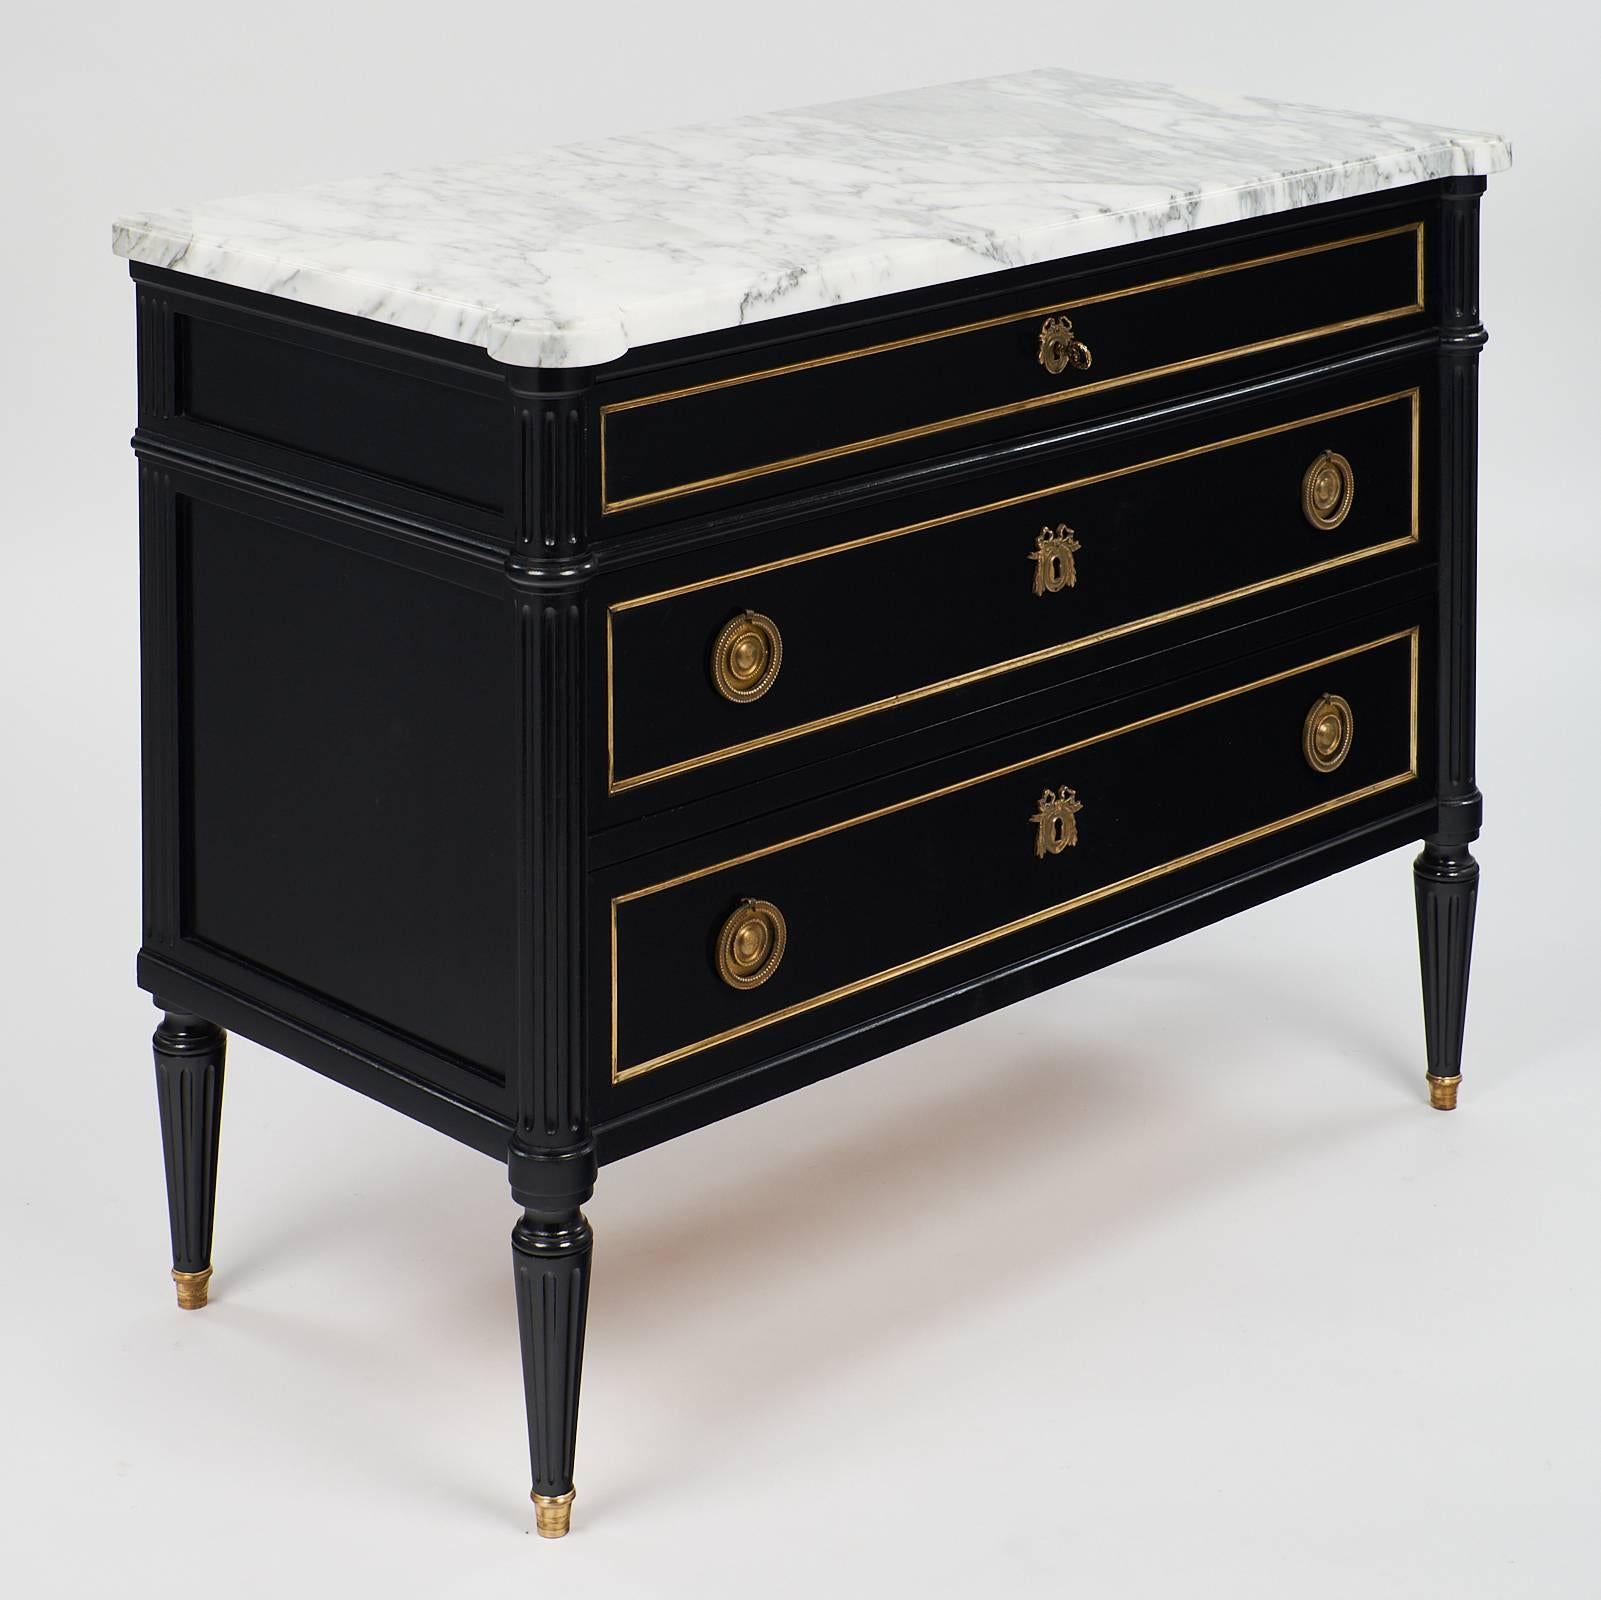 This Classic Louis XVI style ebonized chest features a stunning Carrara marble top with rich veining, three dovetailed drawers, and tapered, fluted legs, circa 1890. This beautiful piece has brass trim and feet caps, as well as beautifully cast